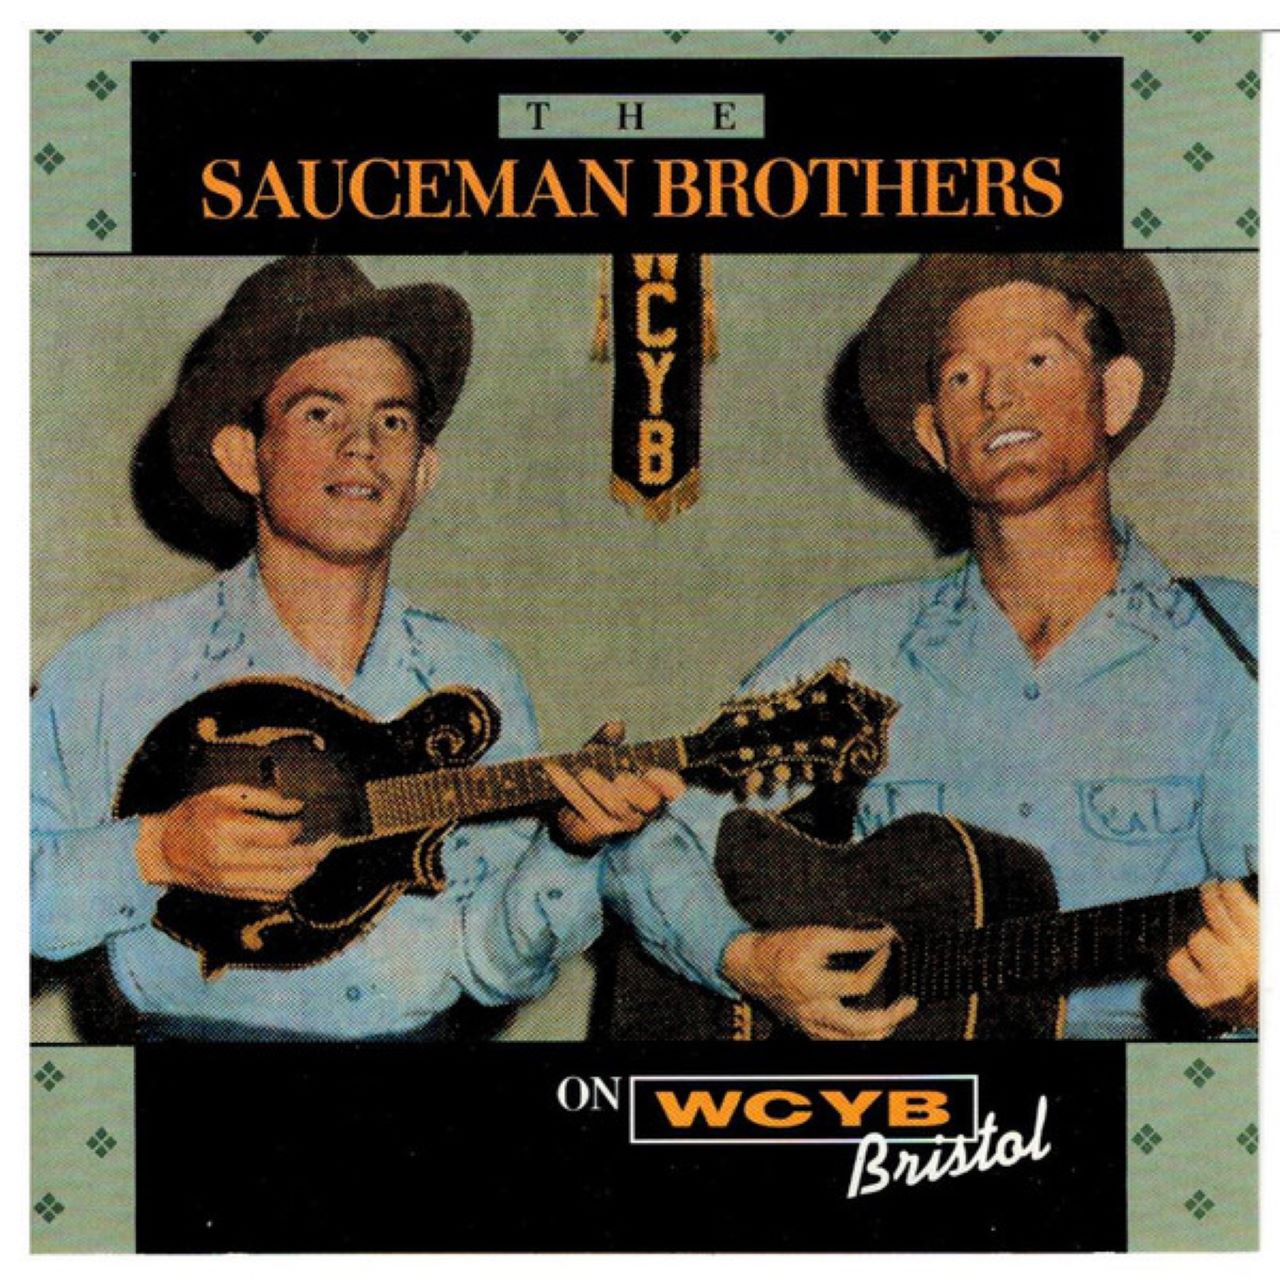 Sauceman Brothers - On WCYB Bristol cover album